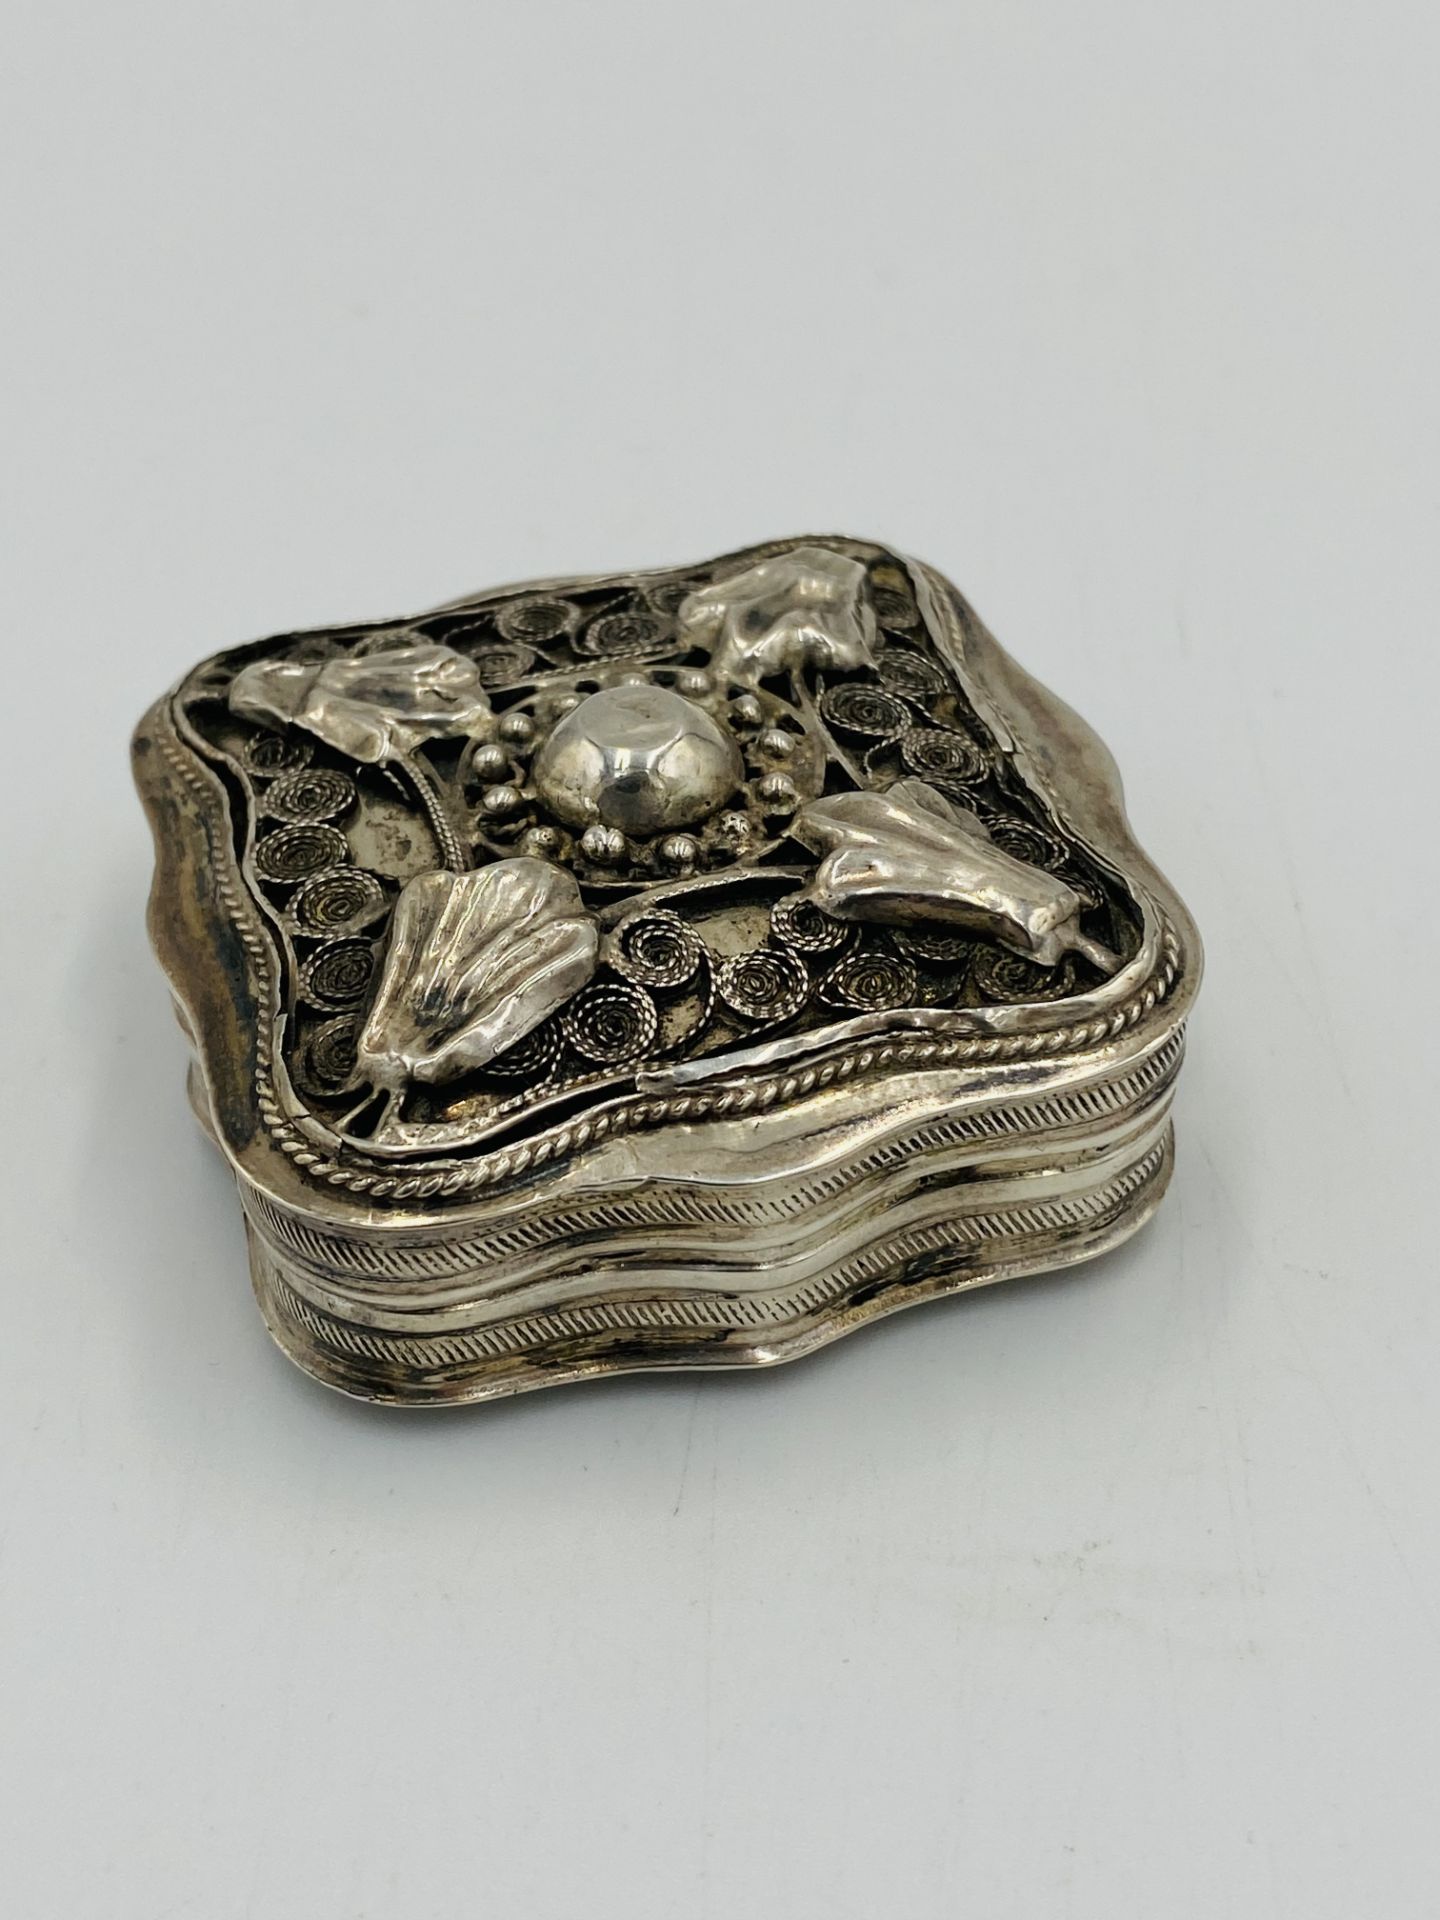 19th century Dutch silver peppermint box - Image 3 of 4